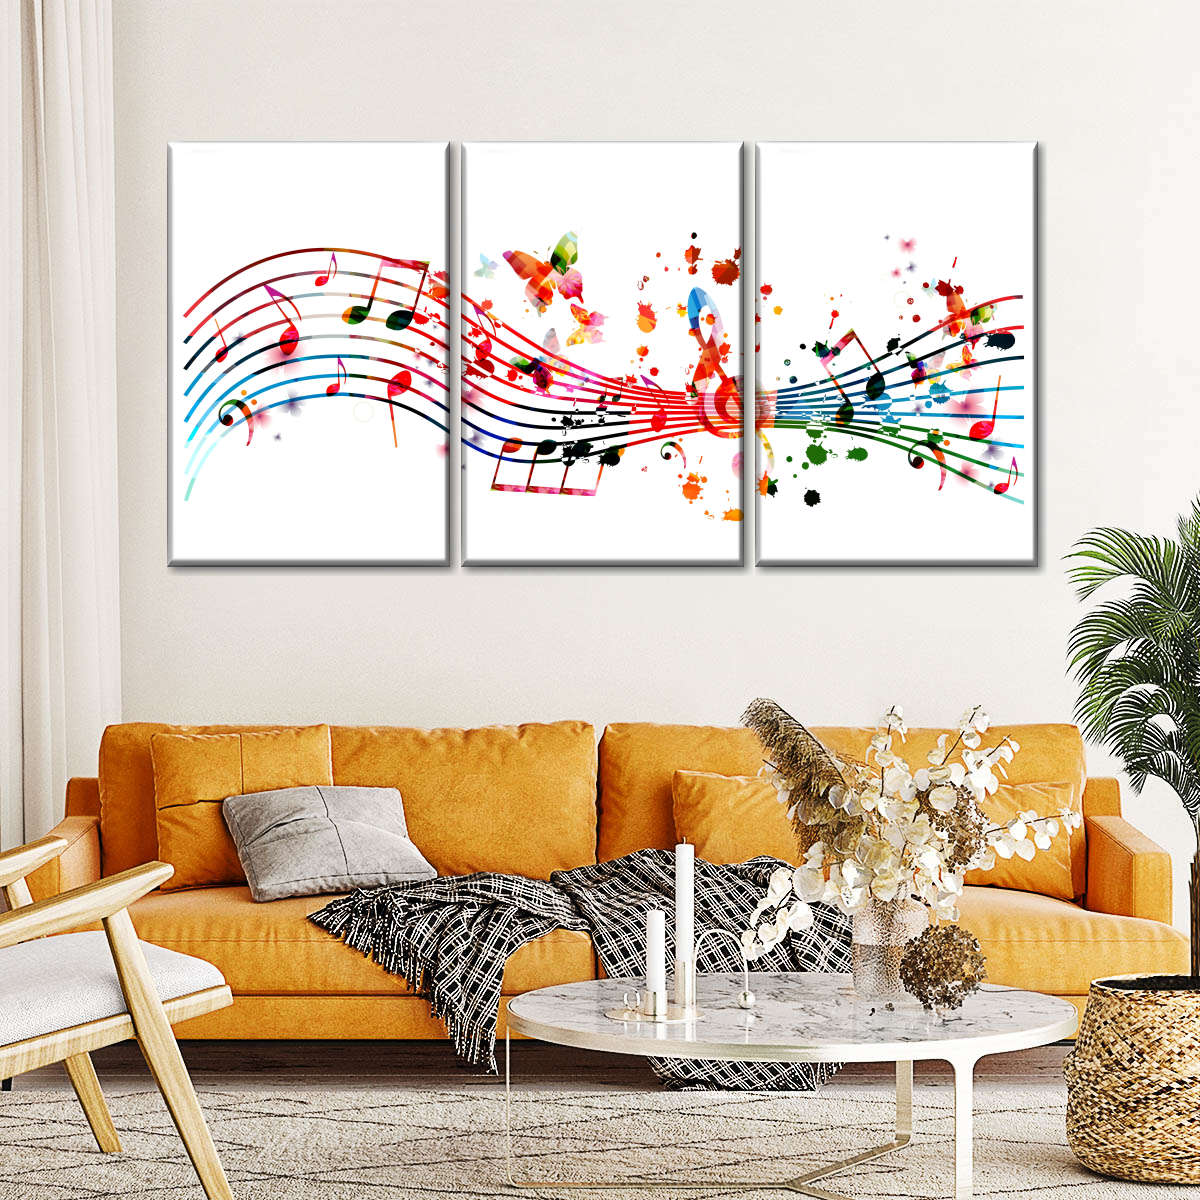 Colorful Musical Notes Wall Art: Canvas Prints, Art Prints & Framed Canvas